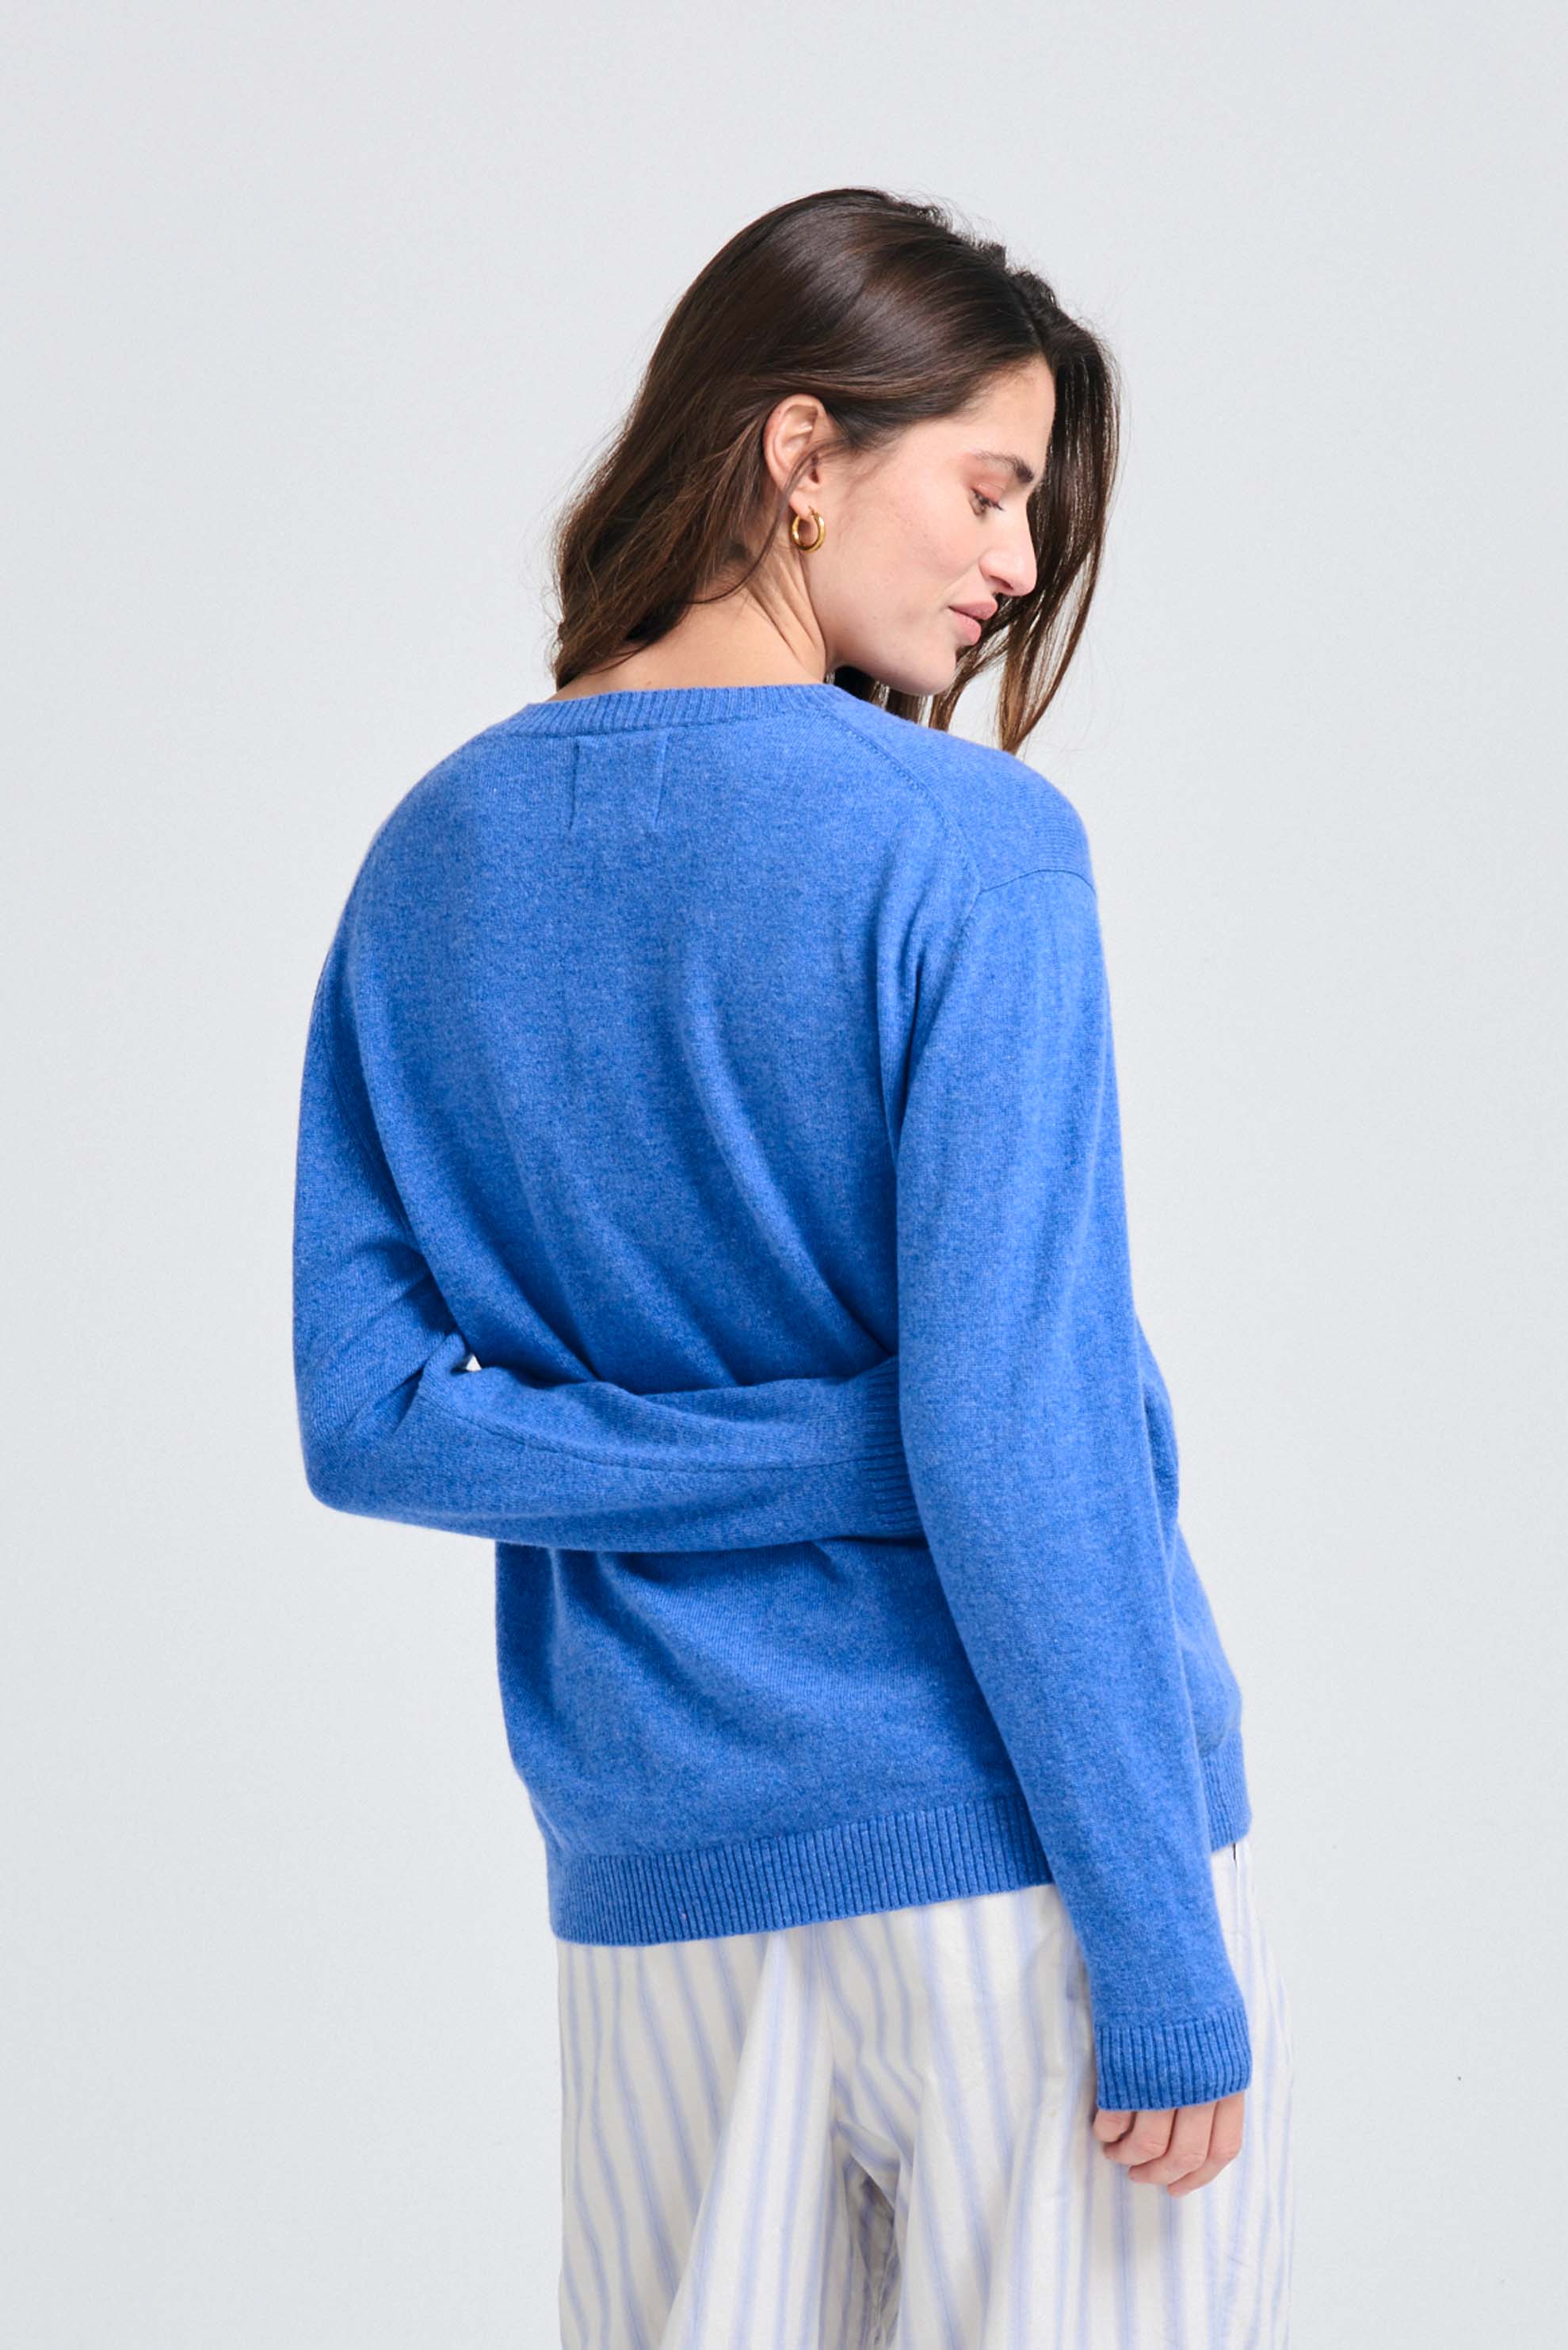 Brown haired female model wearing Jumper1234 Boyfriend fit cashmere crew neck jumper in periwinkle blue facing away from the camera